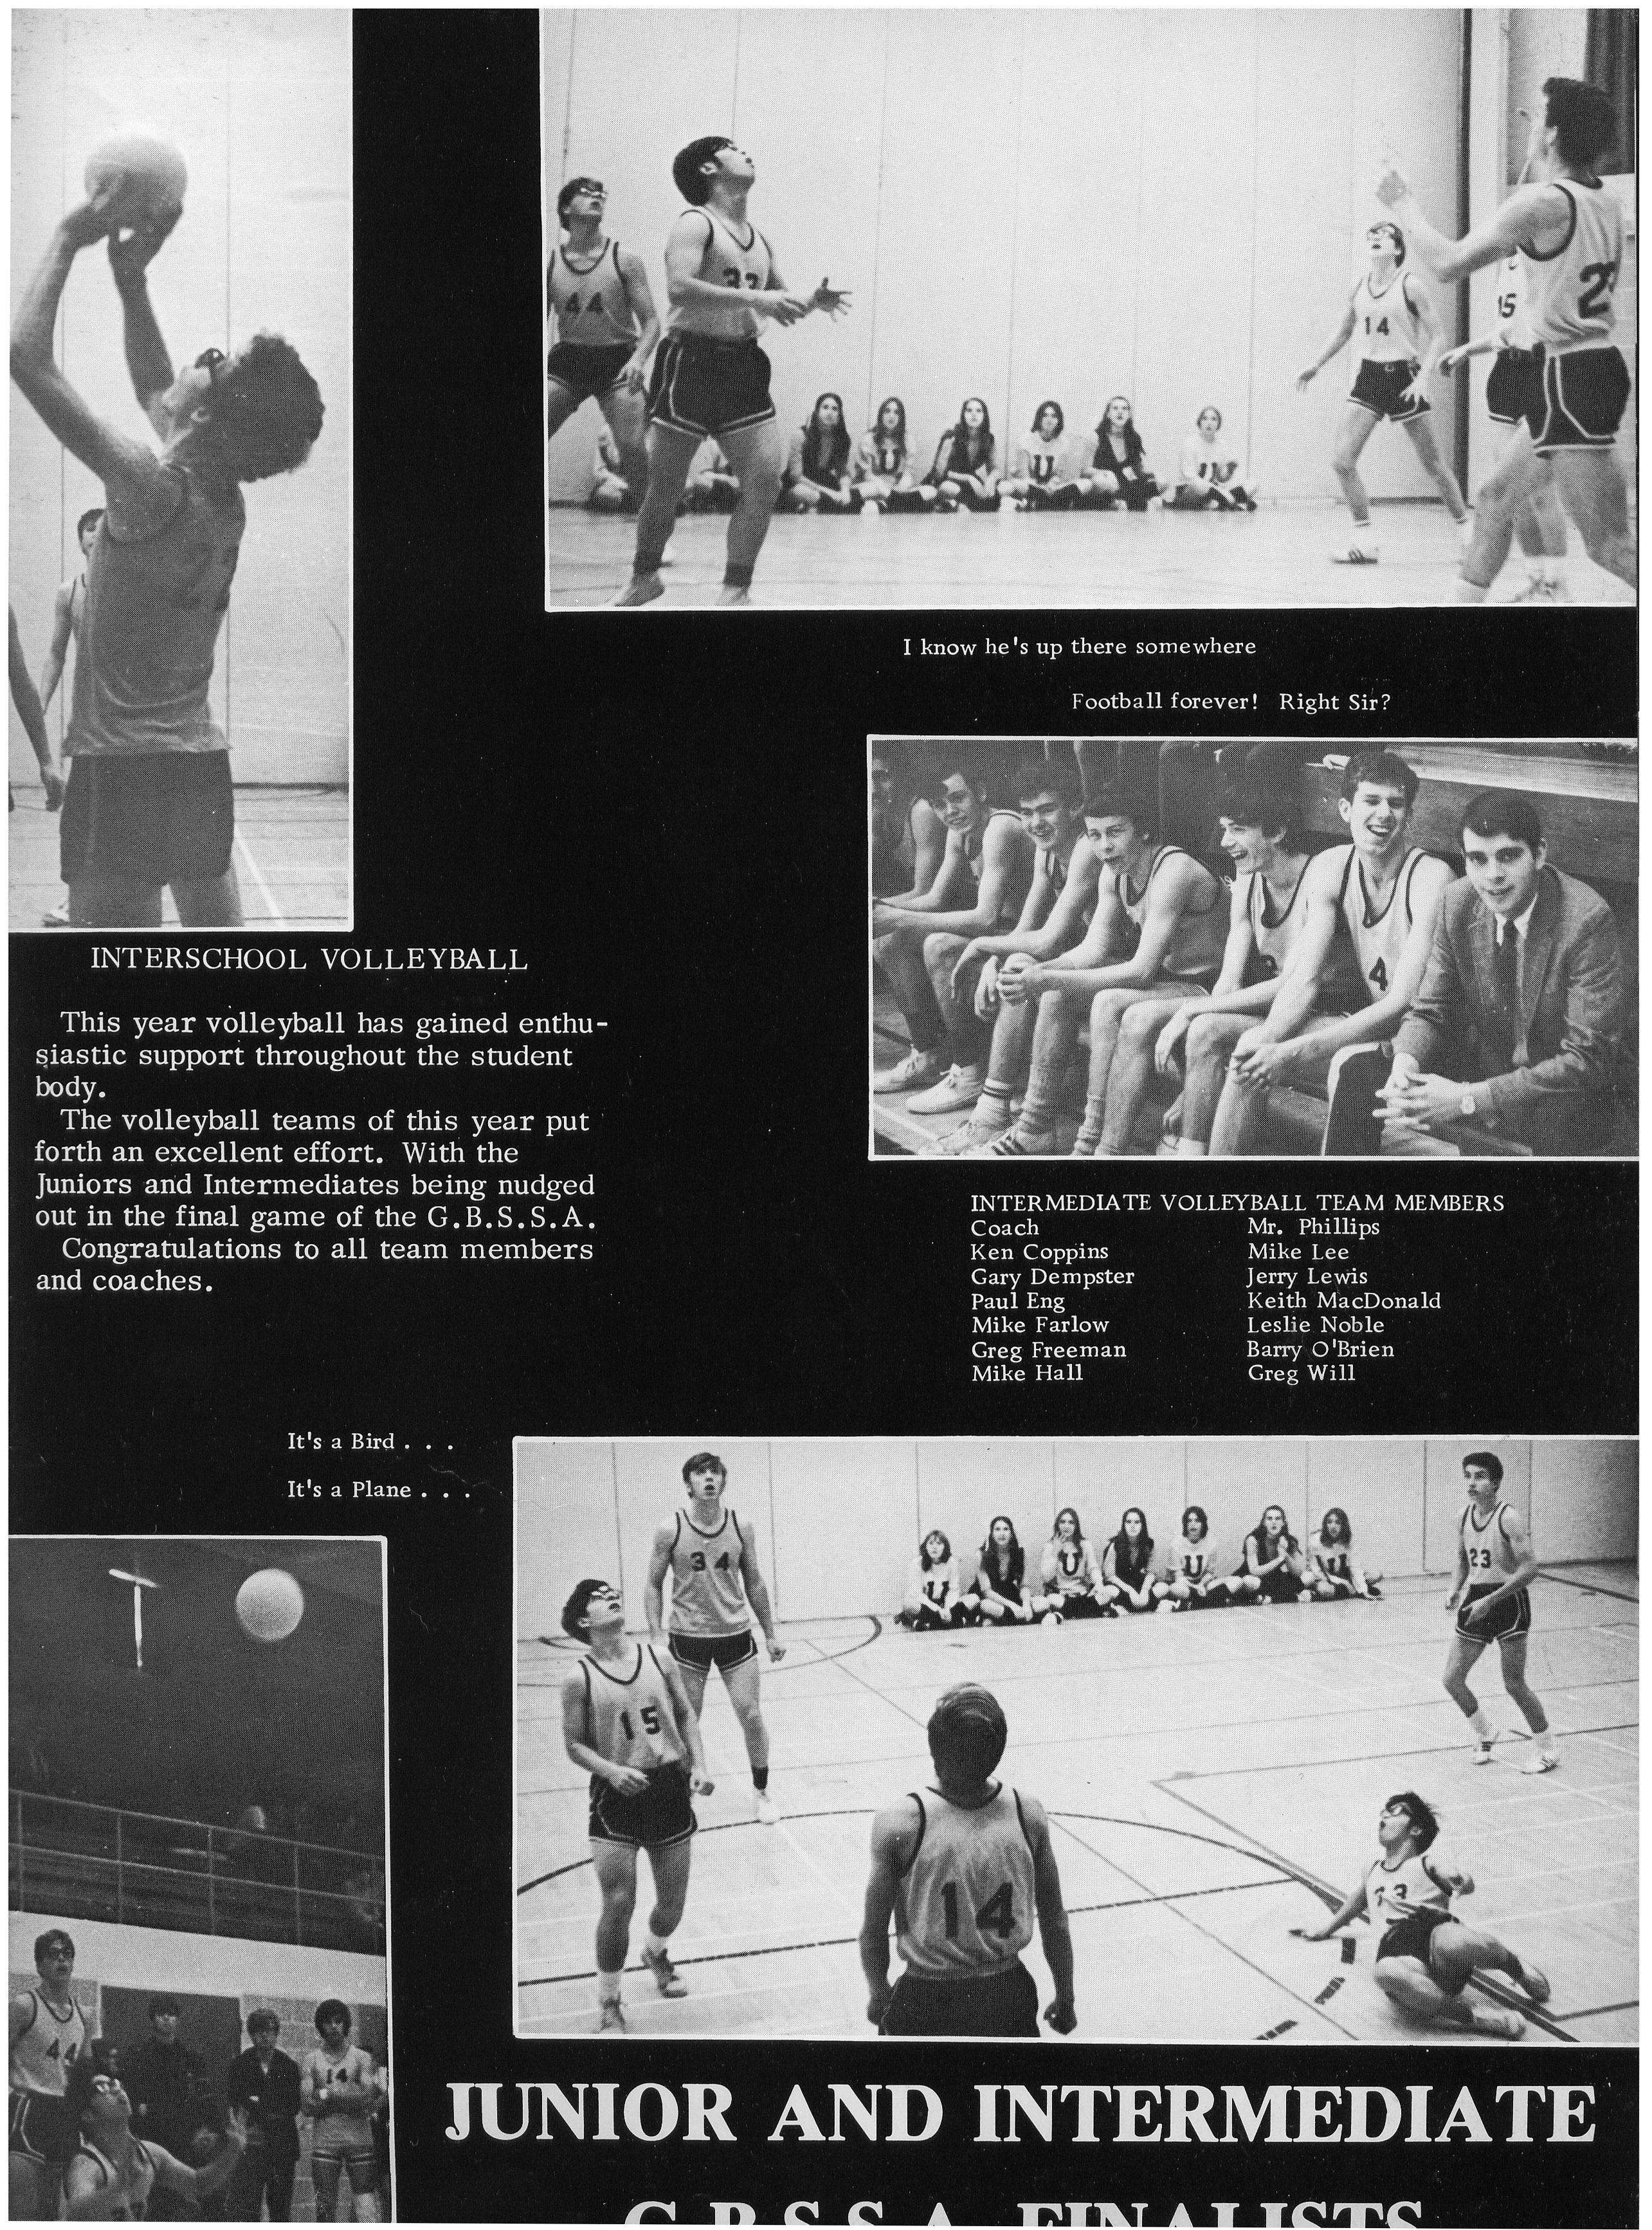 (Click to magnify) Coach: Mr. Dave Phillips, Ken Coppins, Gary Dempster, Paul Eng, Mike Farlow, Greg Freeman, Mike Hall, Mike Lee, Jerry Lewis, Keith MacDonald, Leslie Noble, Barry O'Brien, Greg Will.